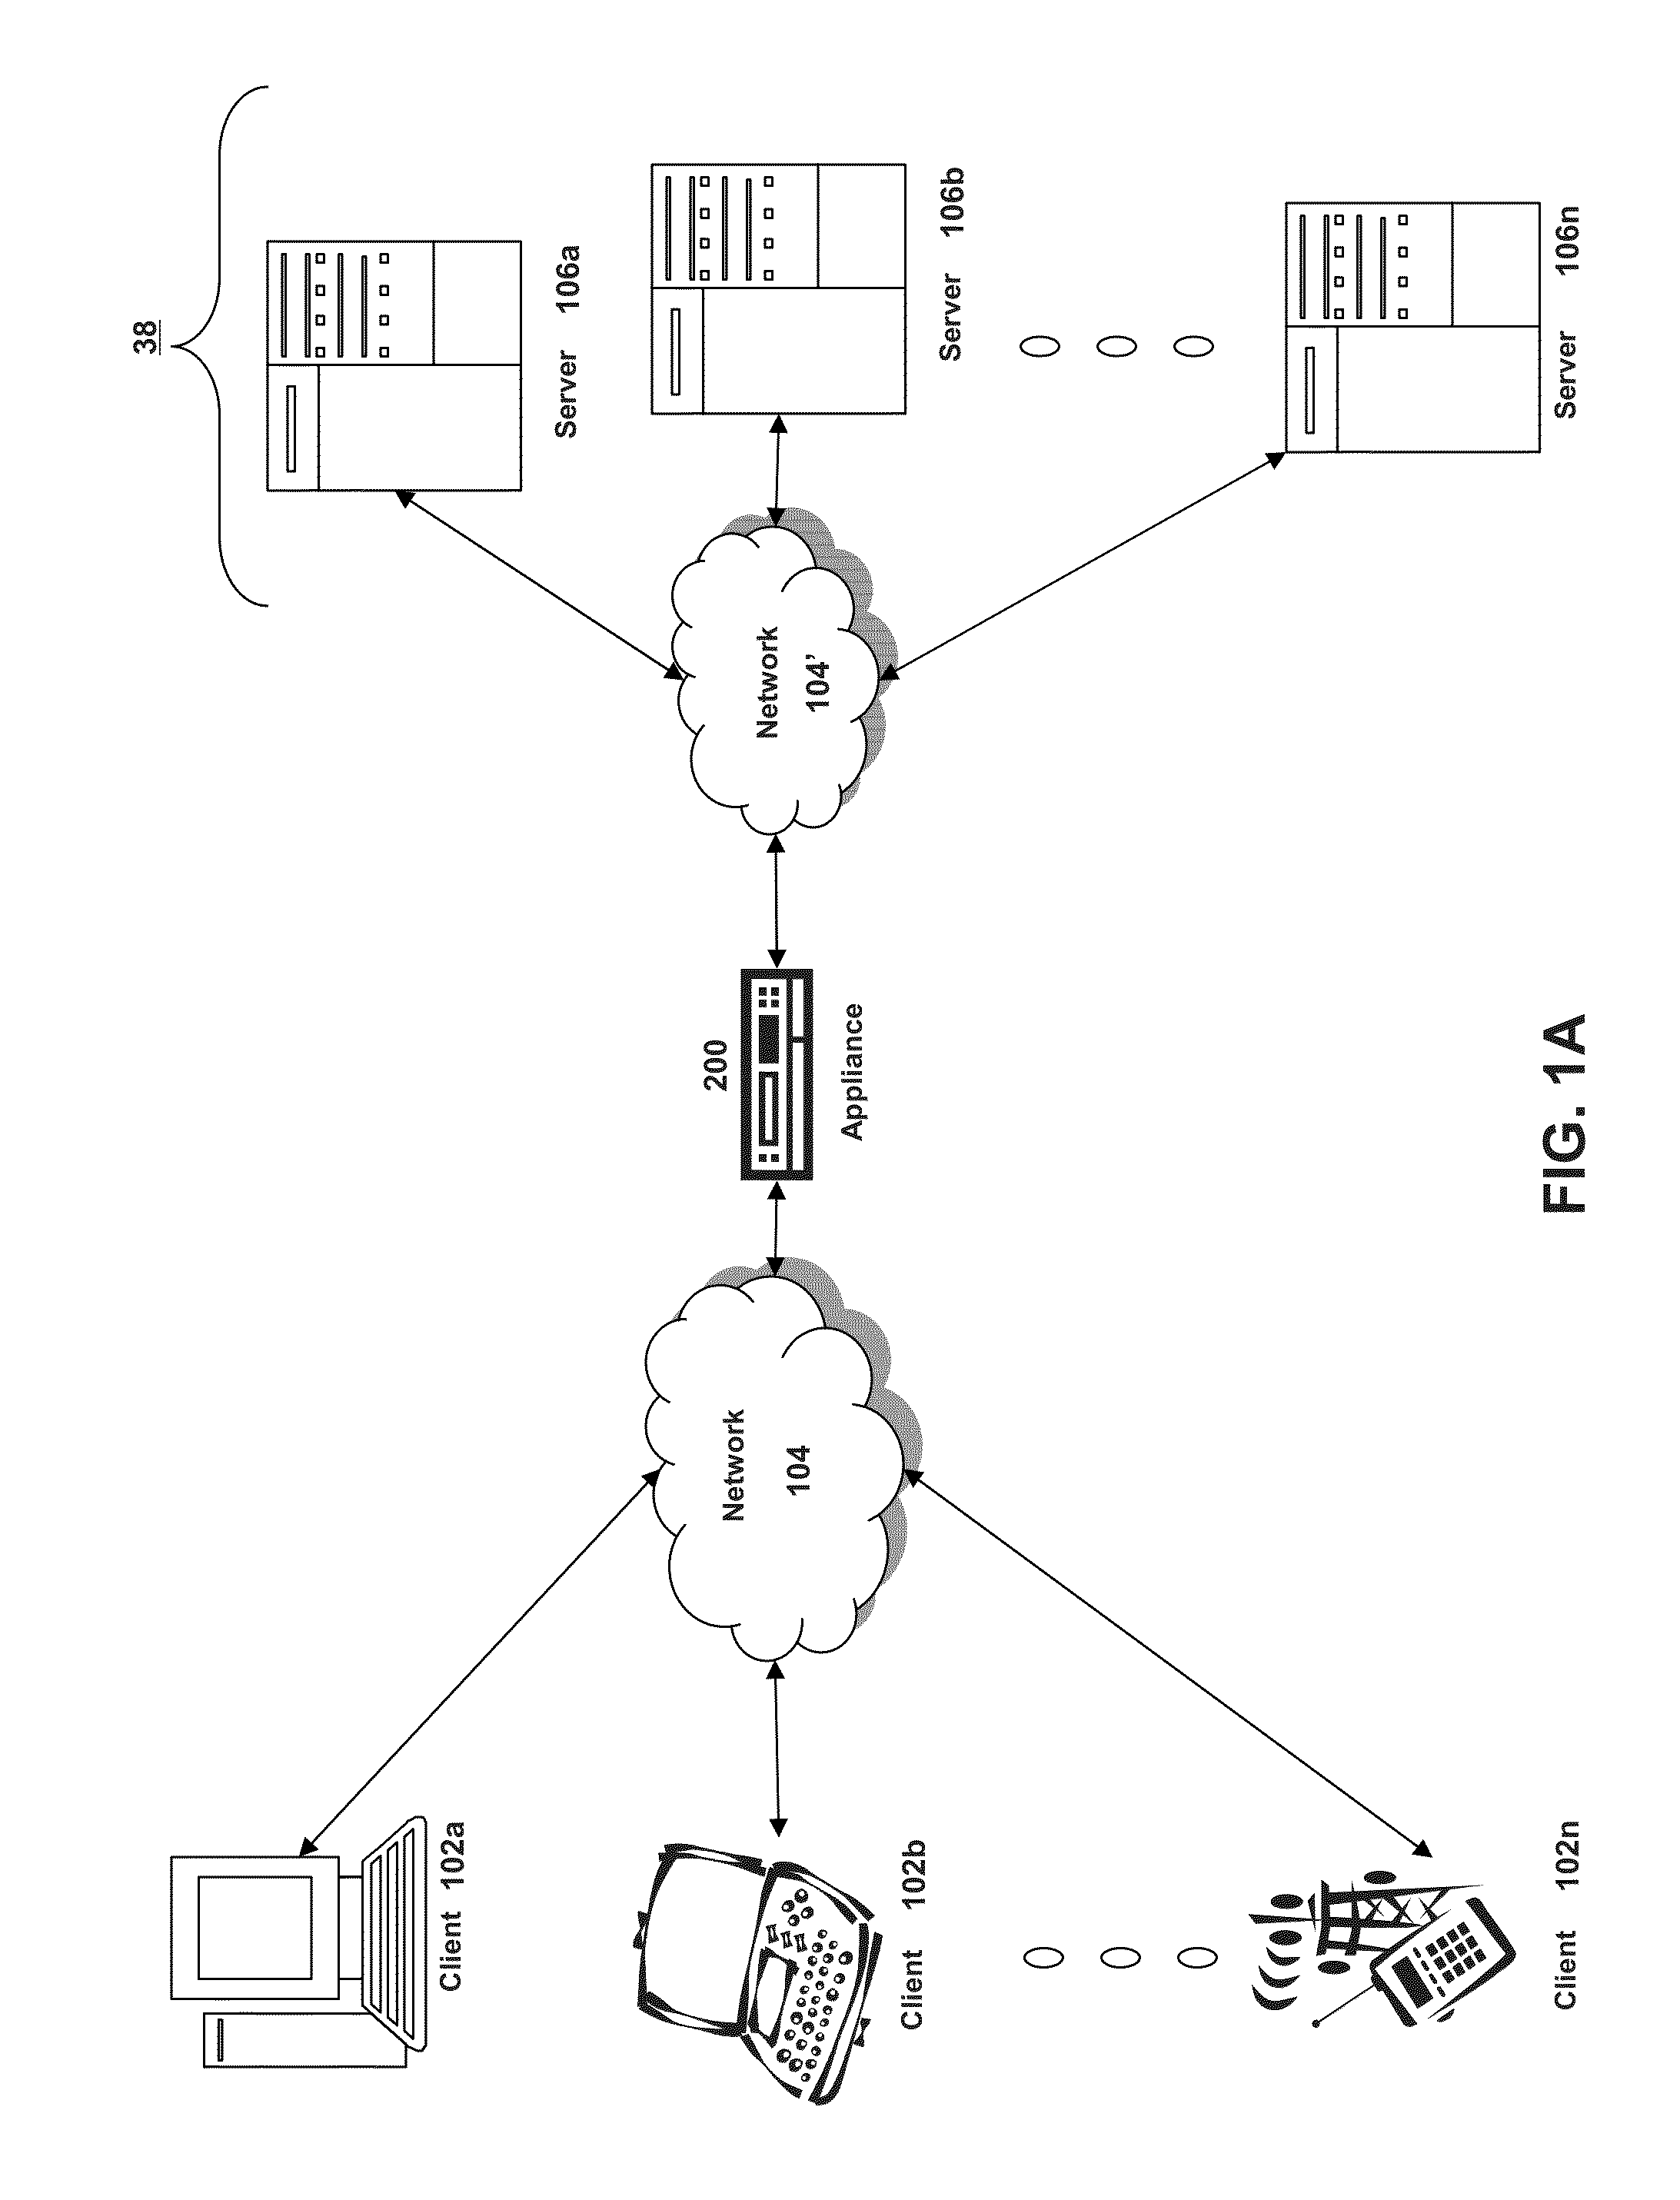 Systems and methods for reliable replication of an application-state, distributed replication table